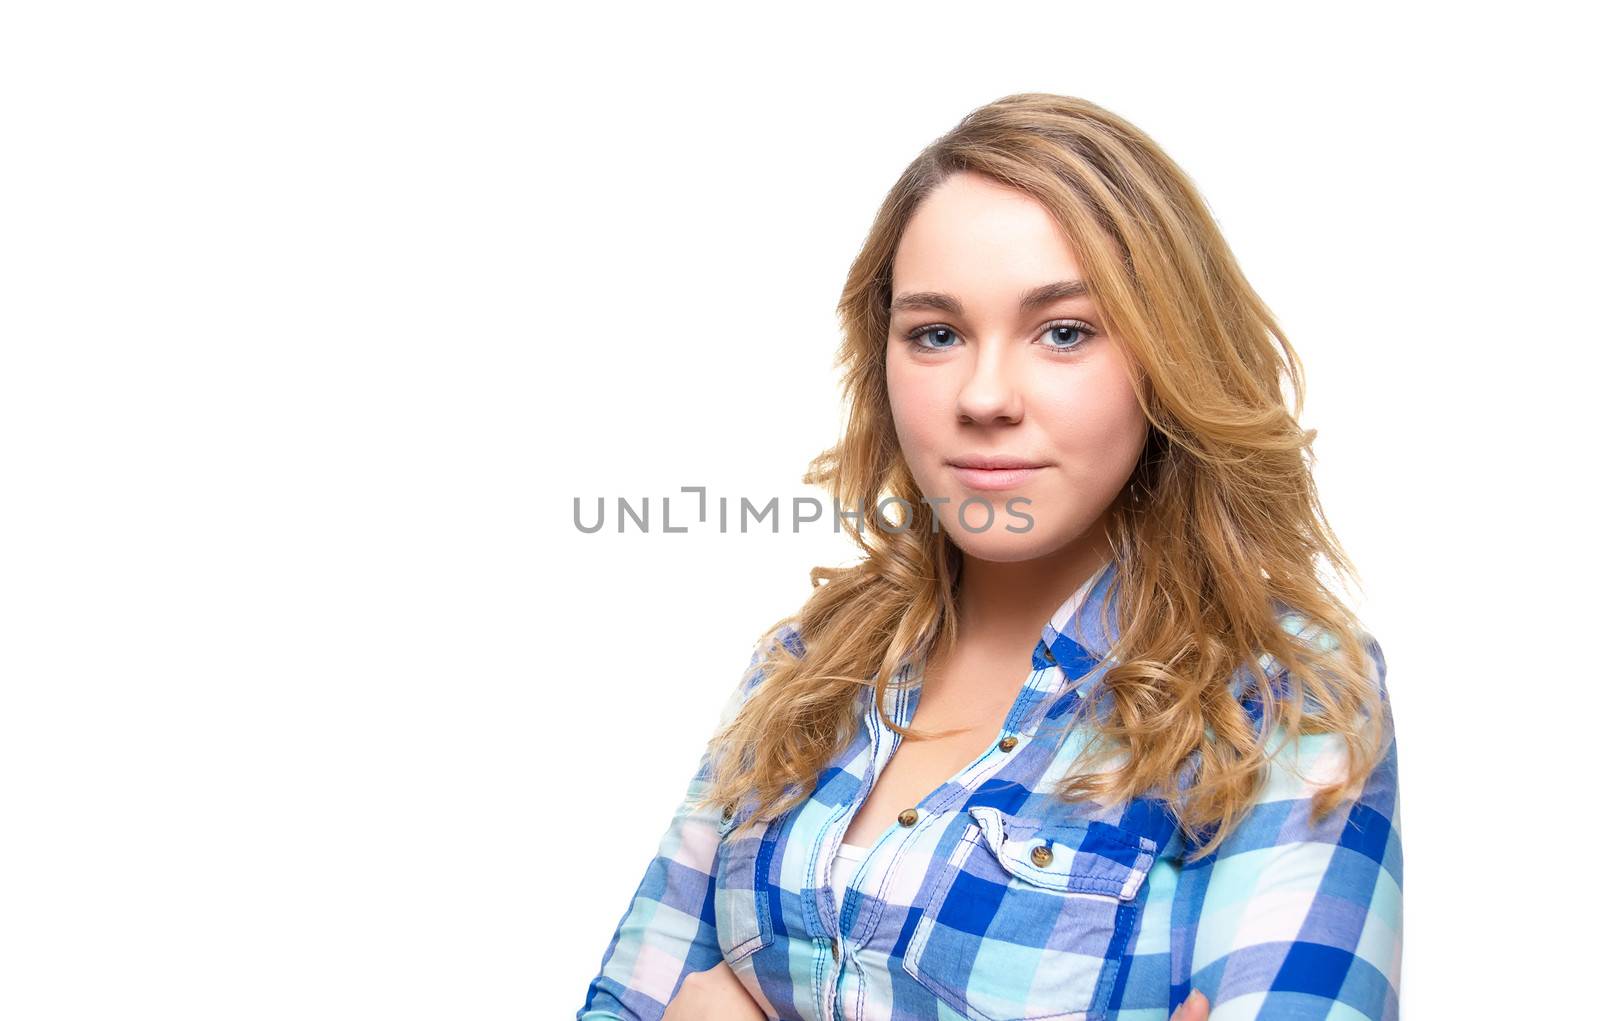 Portrait of beautiful blonde teenager student with blue plaid shirt posing on white background